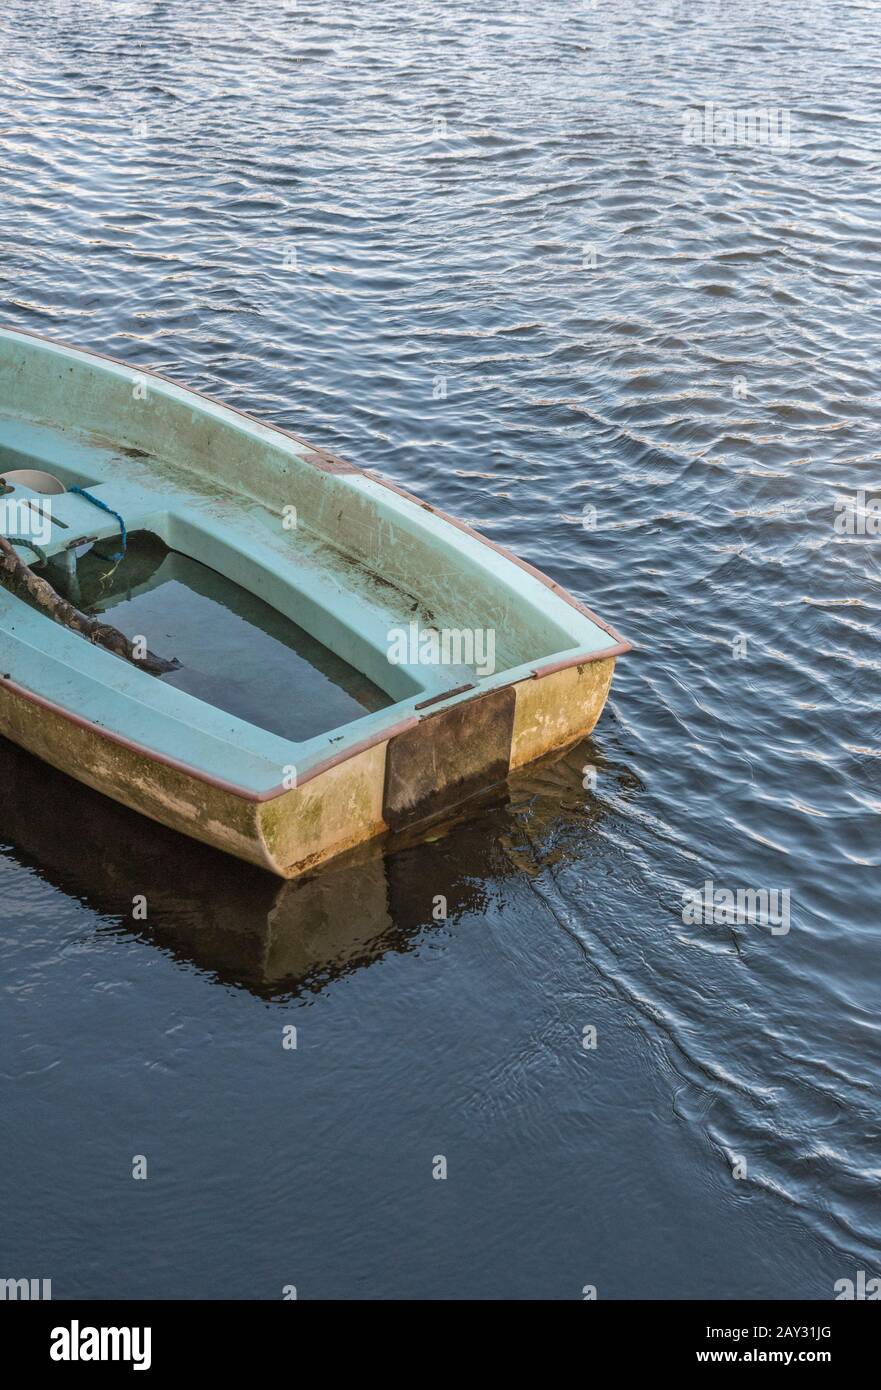 Waterlogged boat for 'sinking ship', 'sink the boat', going down with the ship, organisational failure, crisis management, emergency plan, be prepared Stock Photo